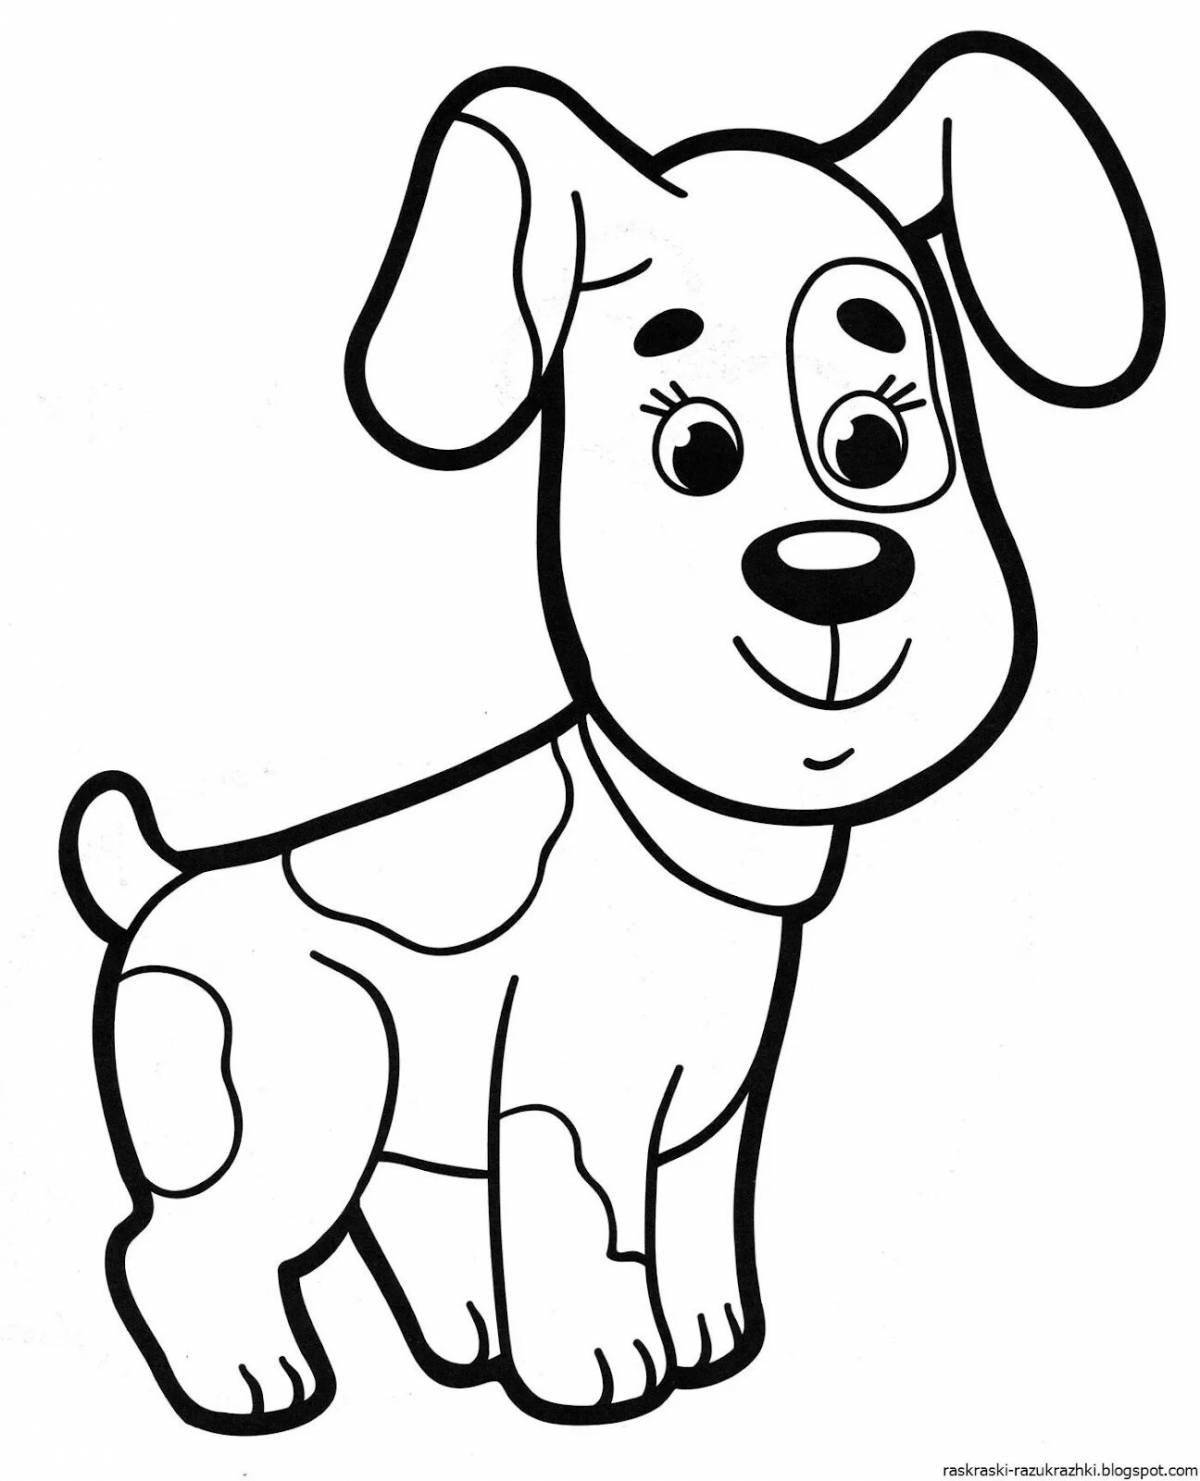 Adorable dog coloring book for kids